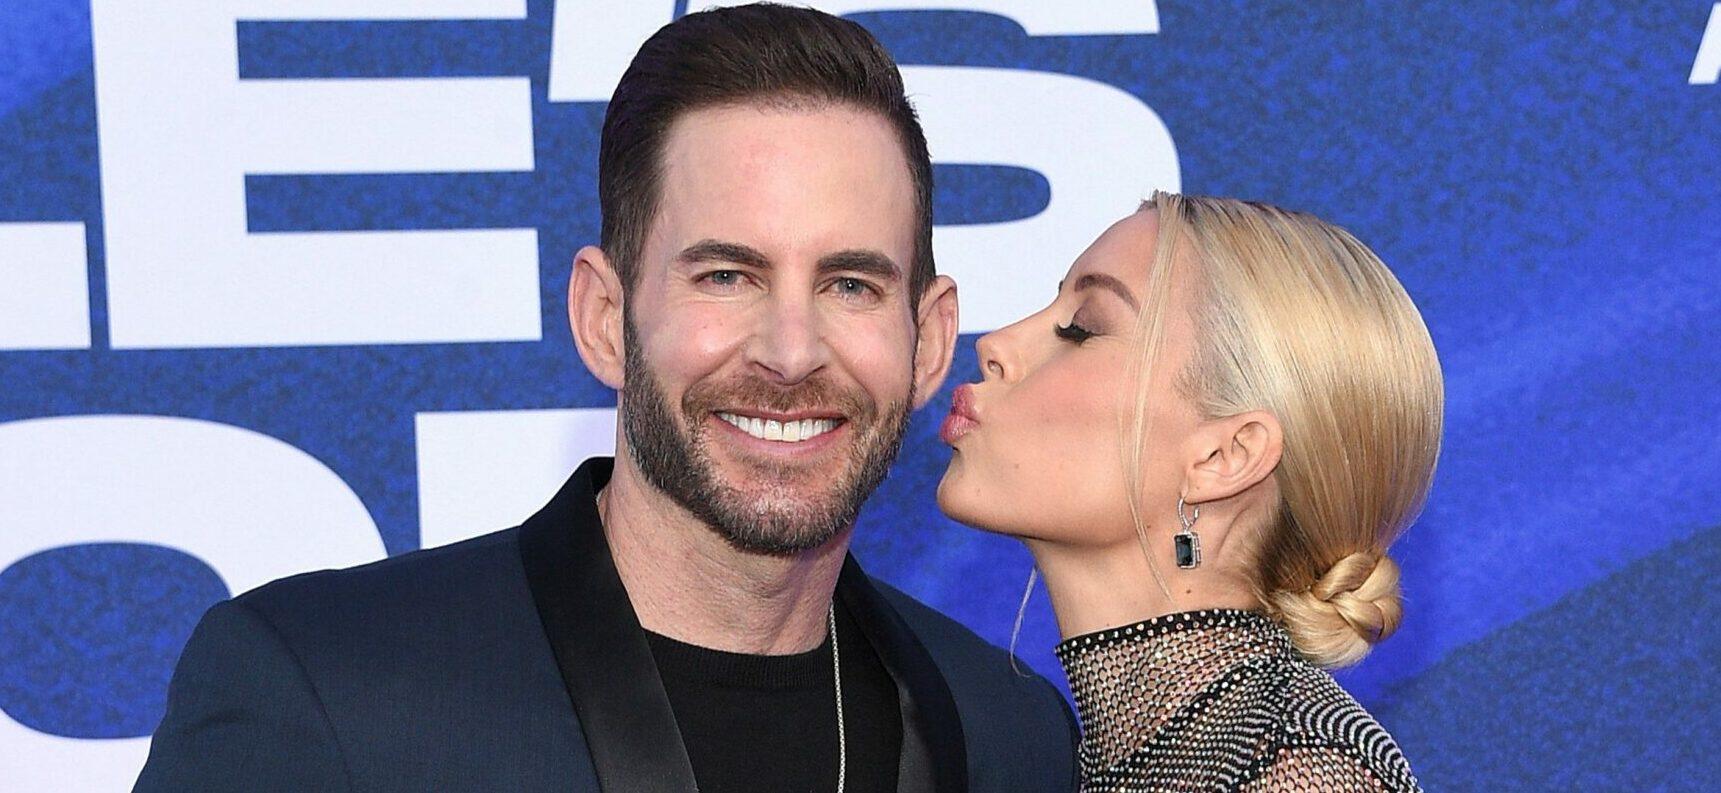 Tarek El Moussa Reveals Accelerated Living Situation With Wife In Sweet Birthday Tribute